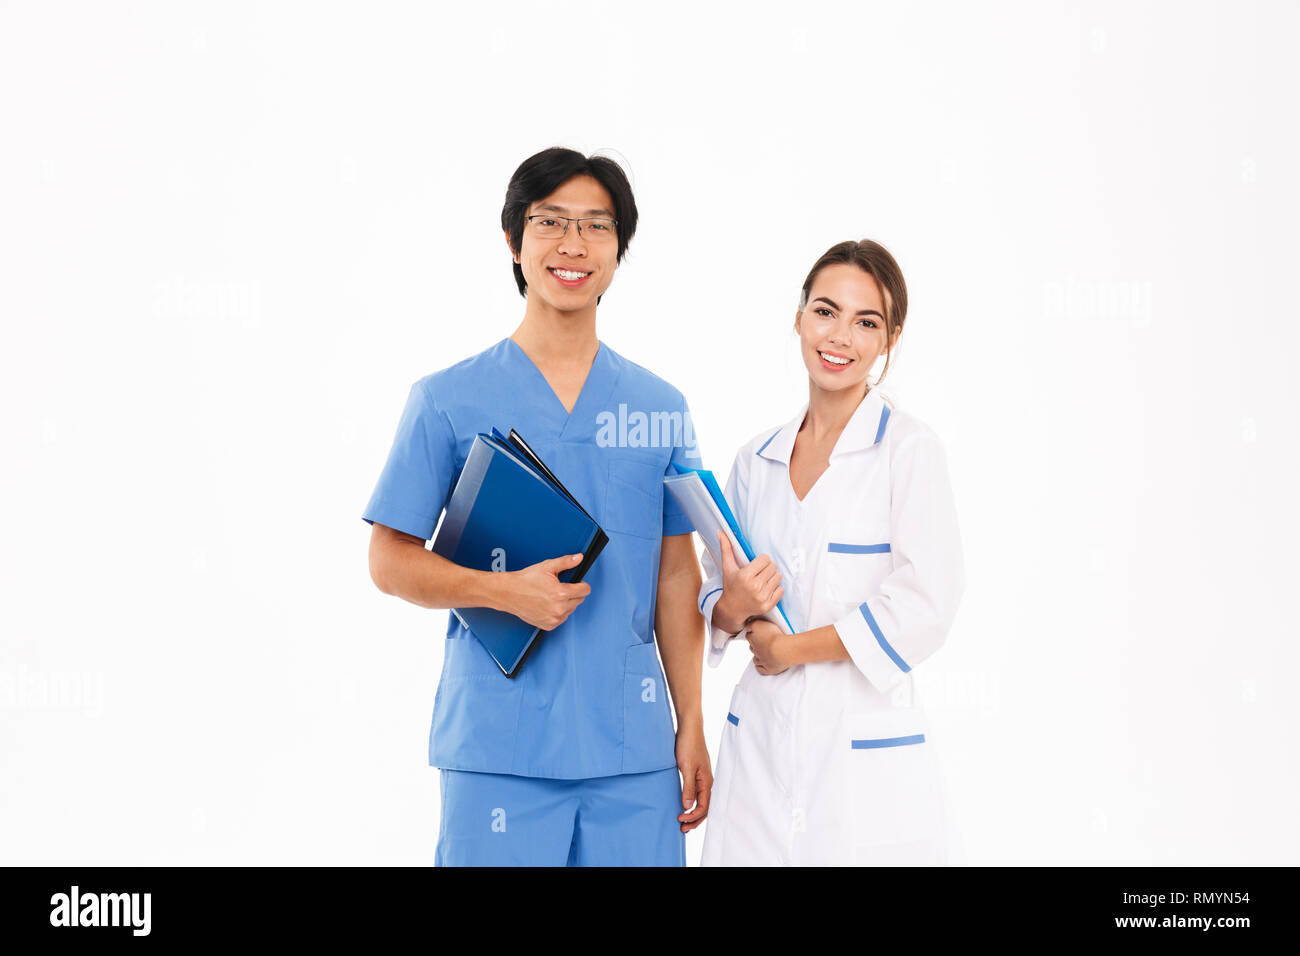 Smiling doctors couple wearing uniform standing isolated over white background, holding folders Stock Photo